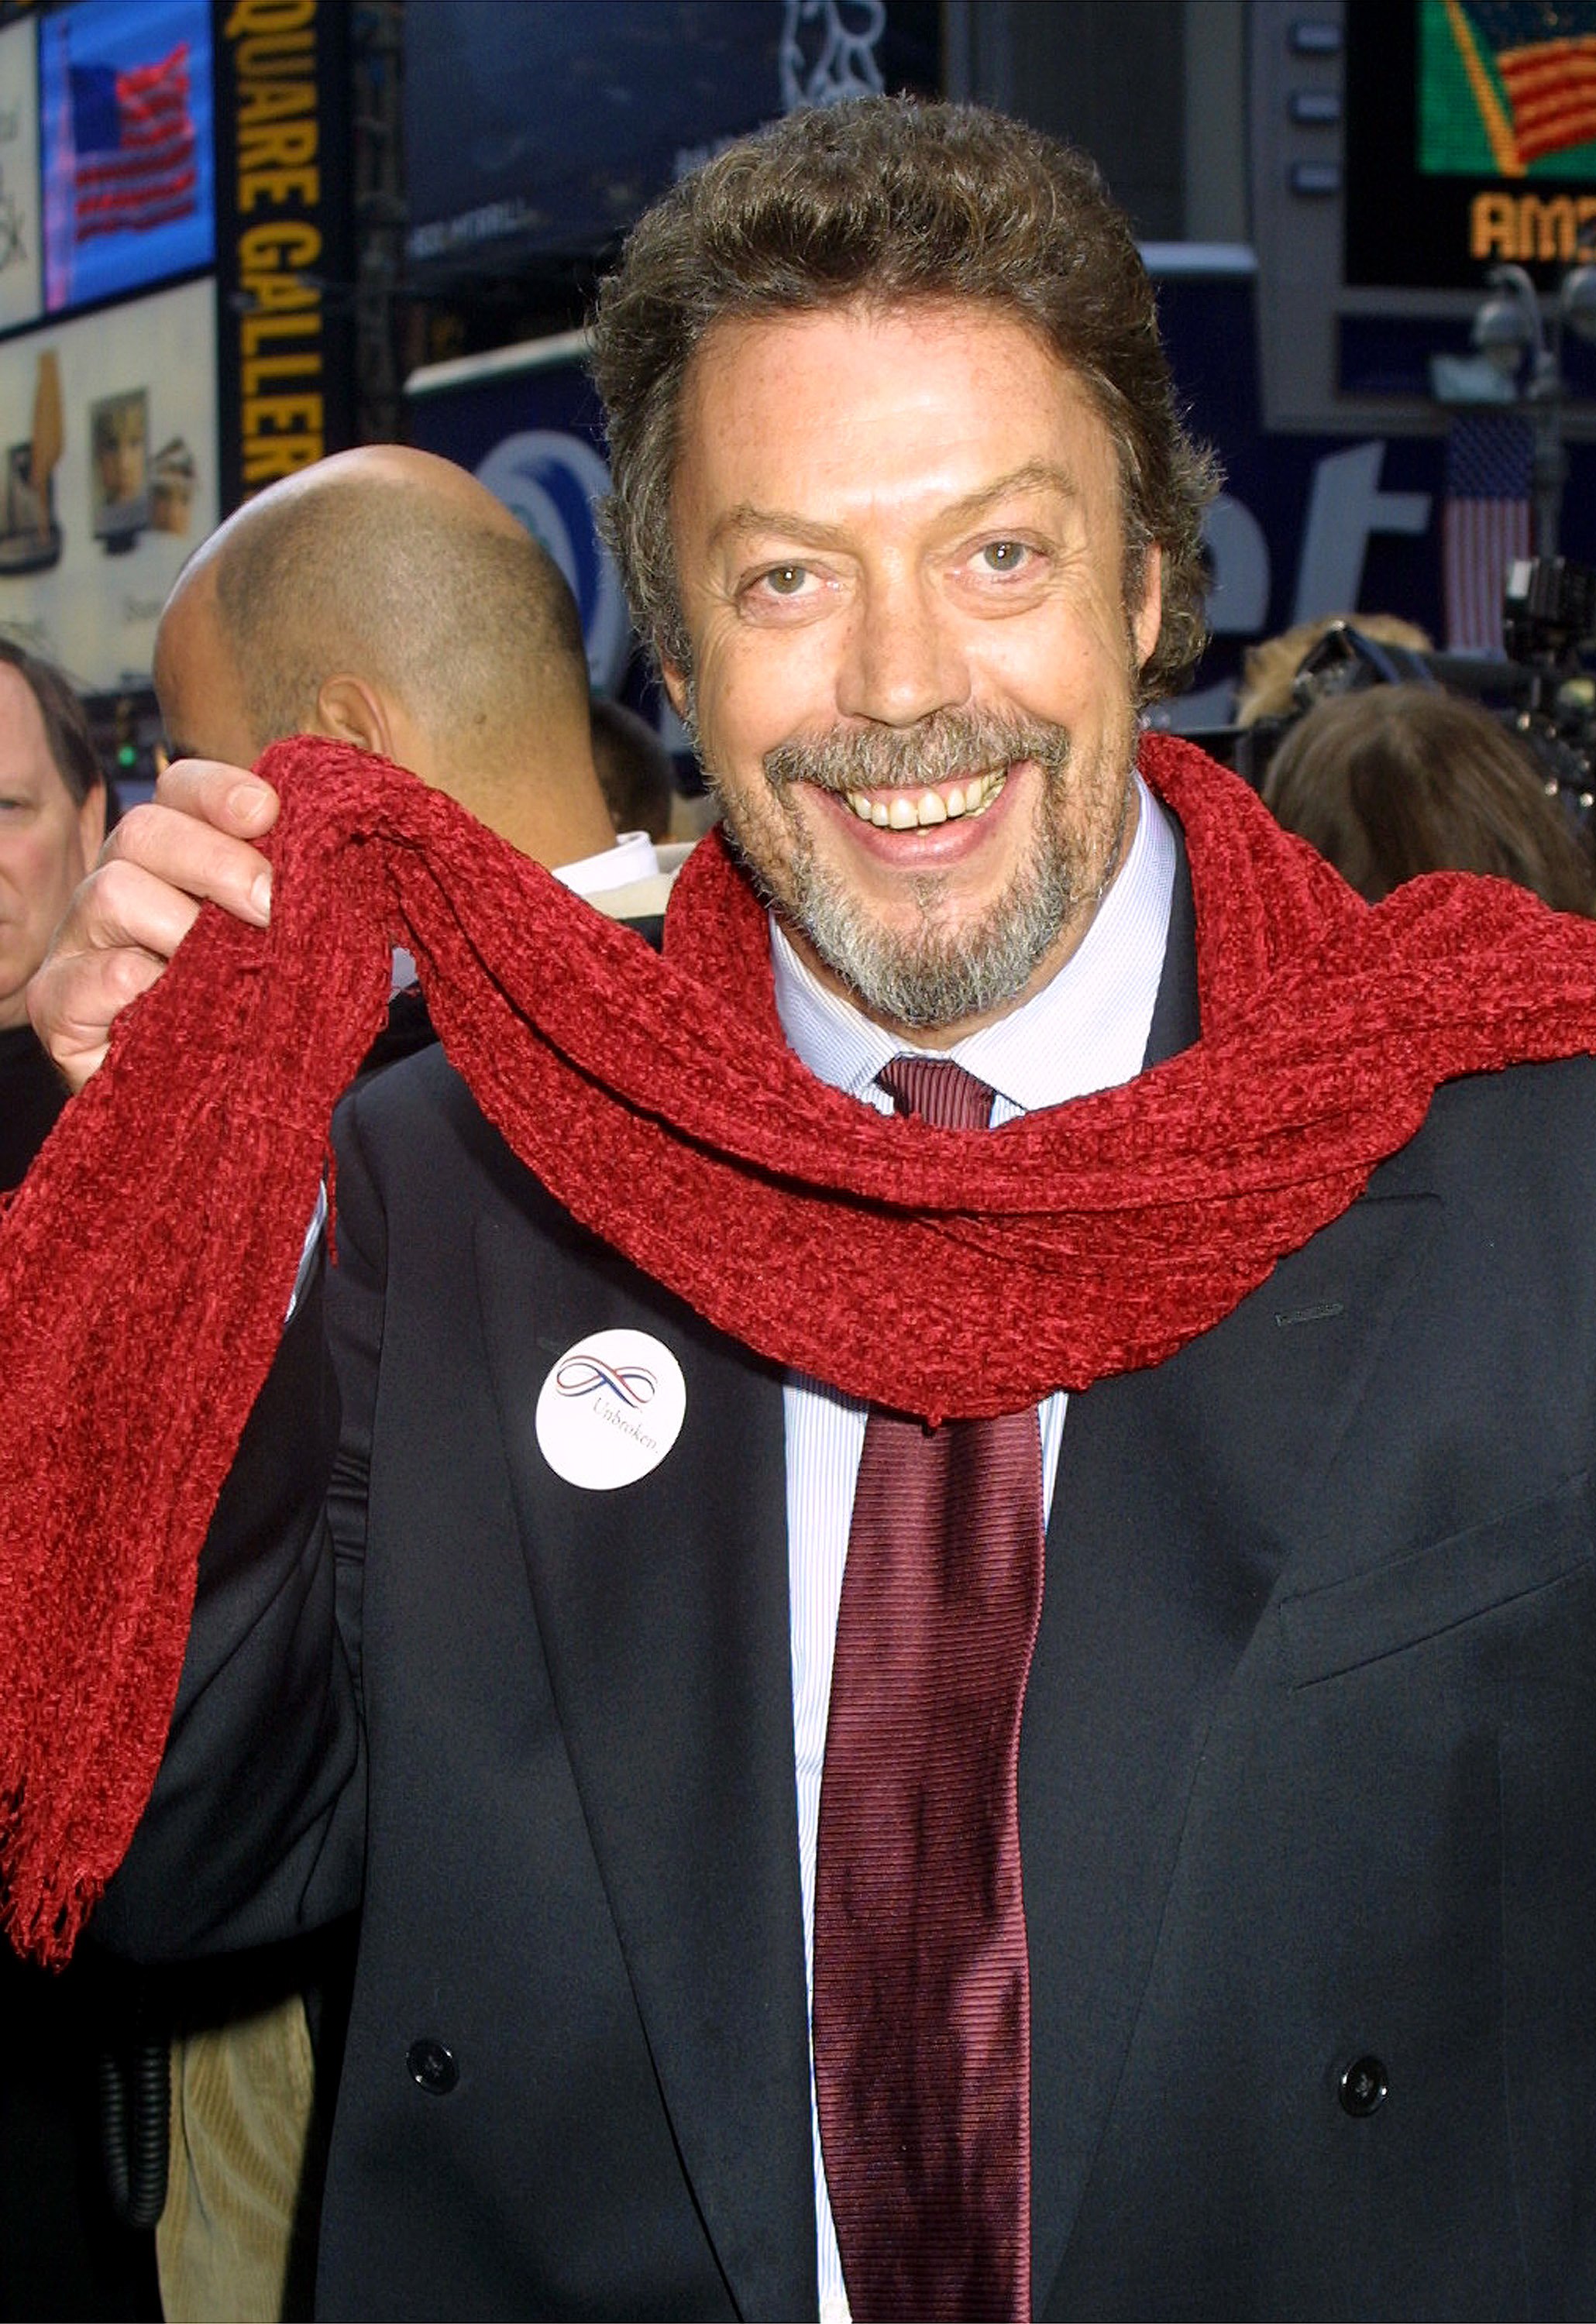 Tim Curry on September 28, 2001, in Times Square, New York City | Source: Getty Images